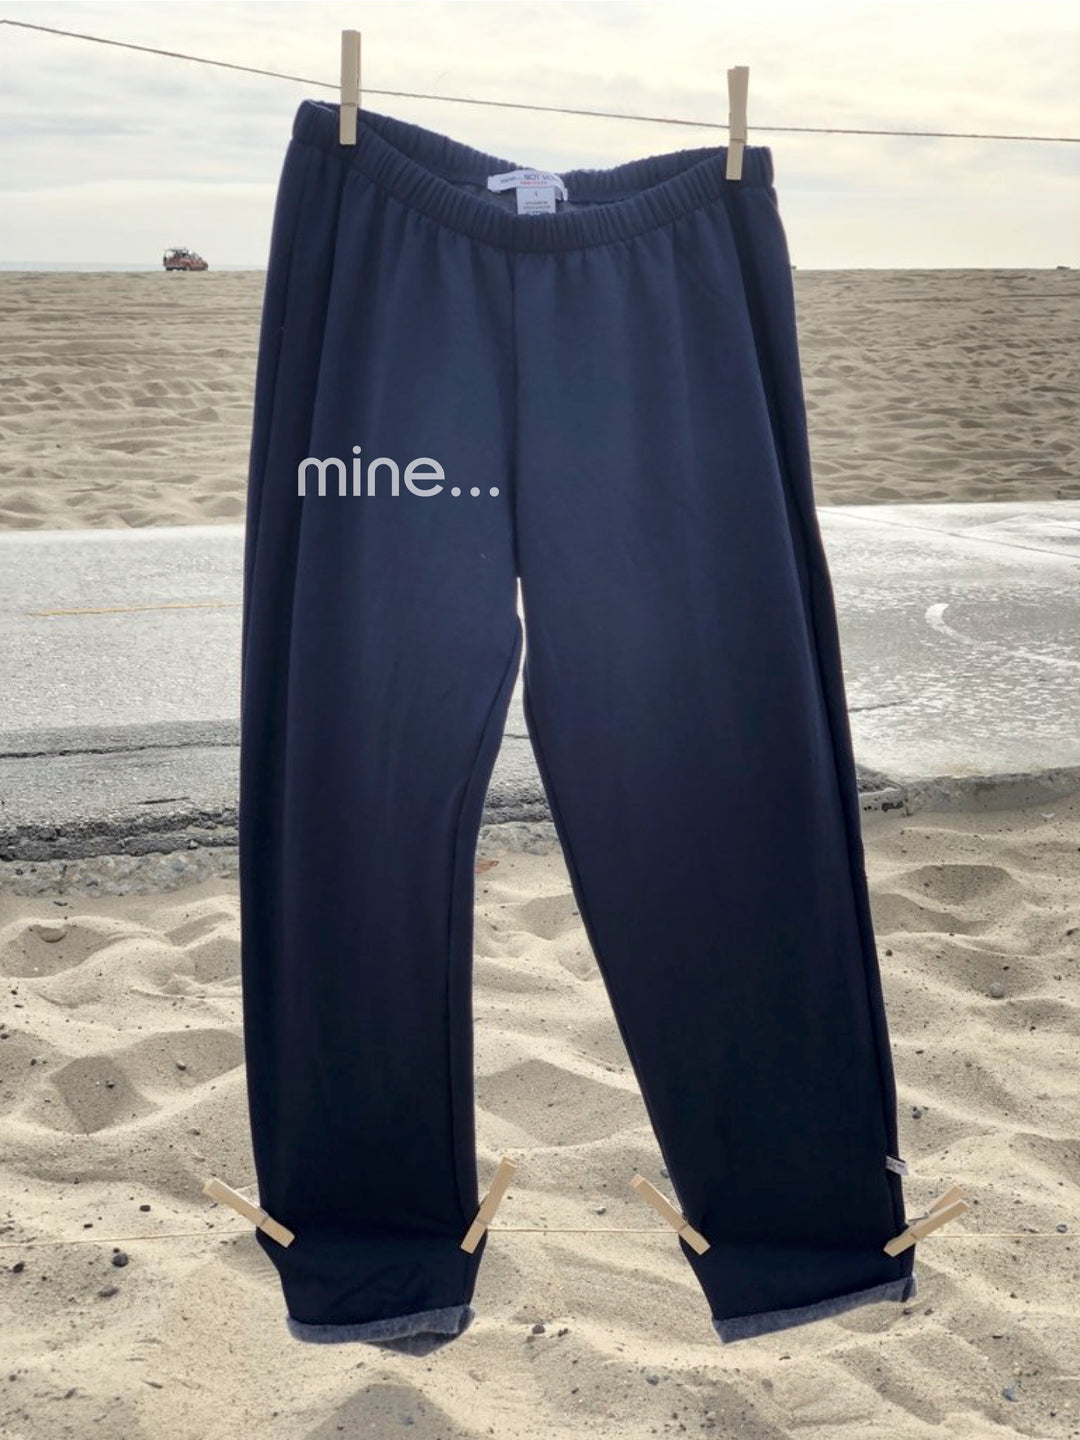 Navy Branded Sweatpants - Kingfisher Road - Online Boutique